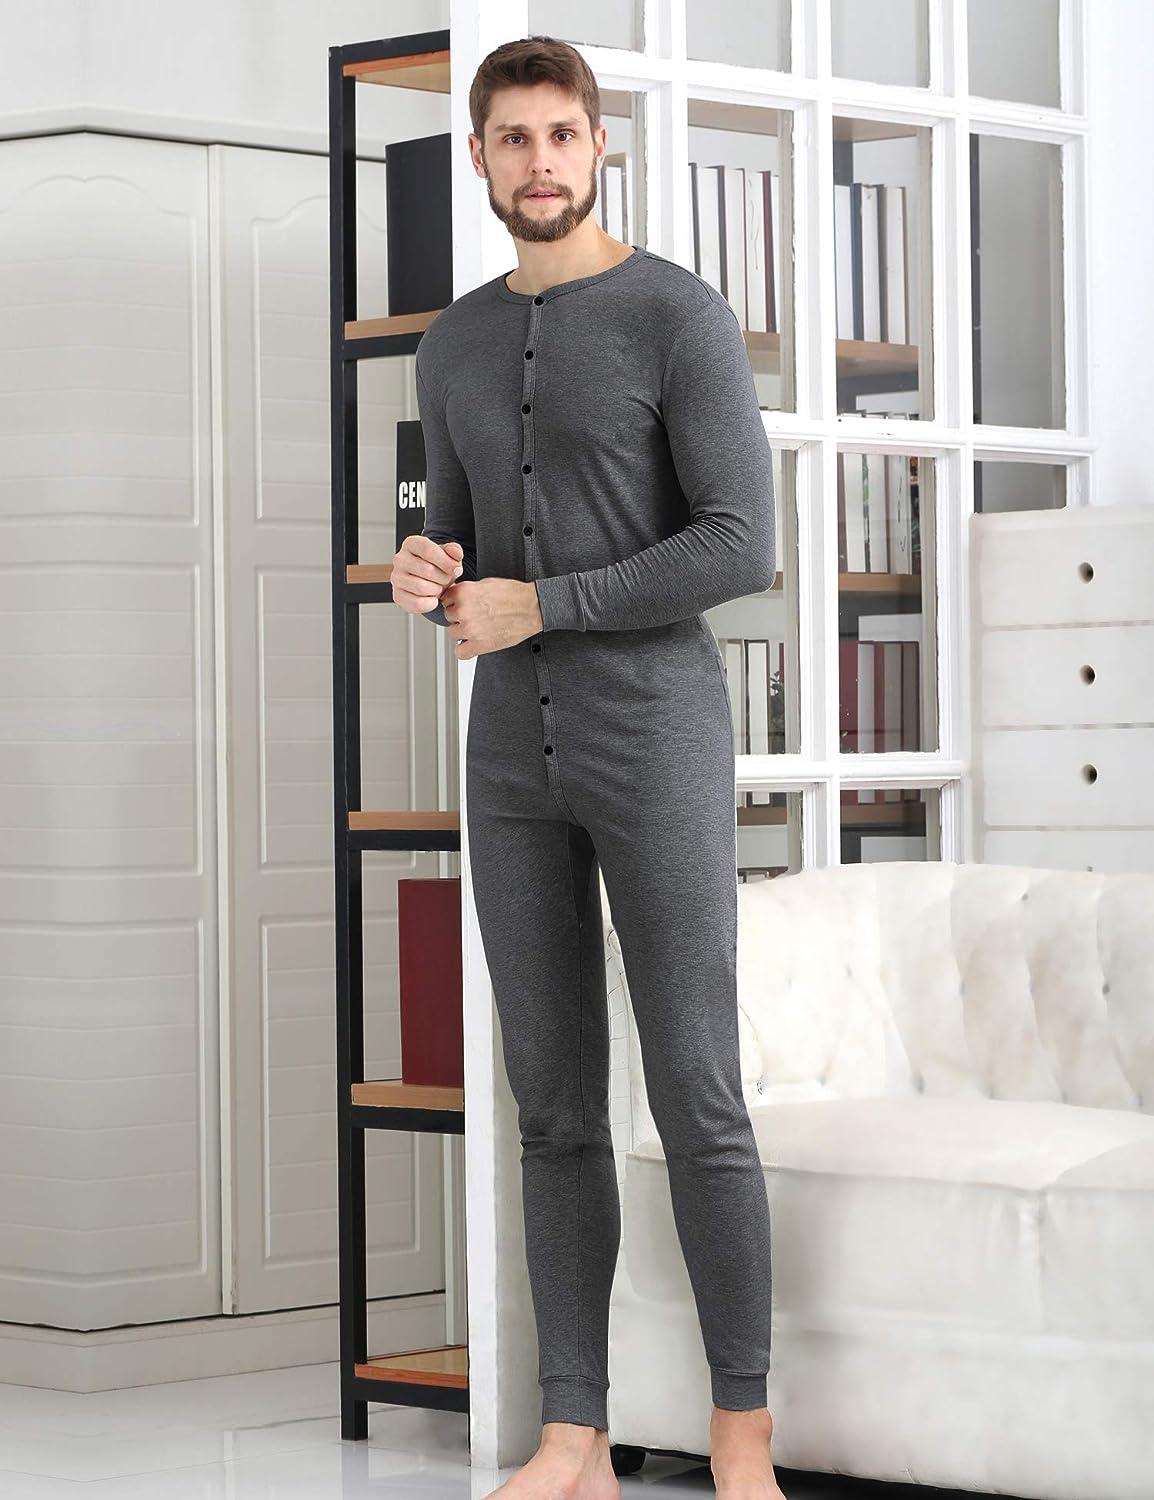 Men's Fleece Thickened Round Neck Thermal Suit – Save4u